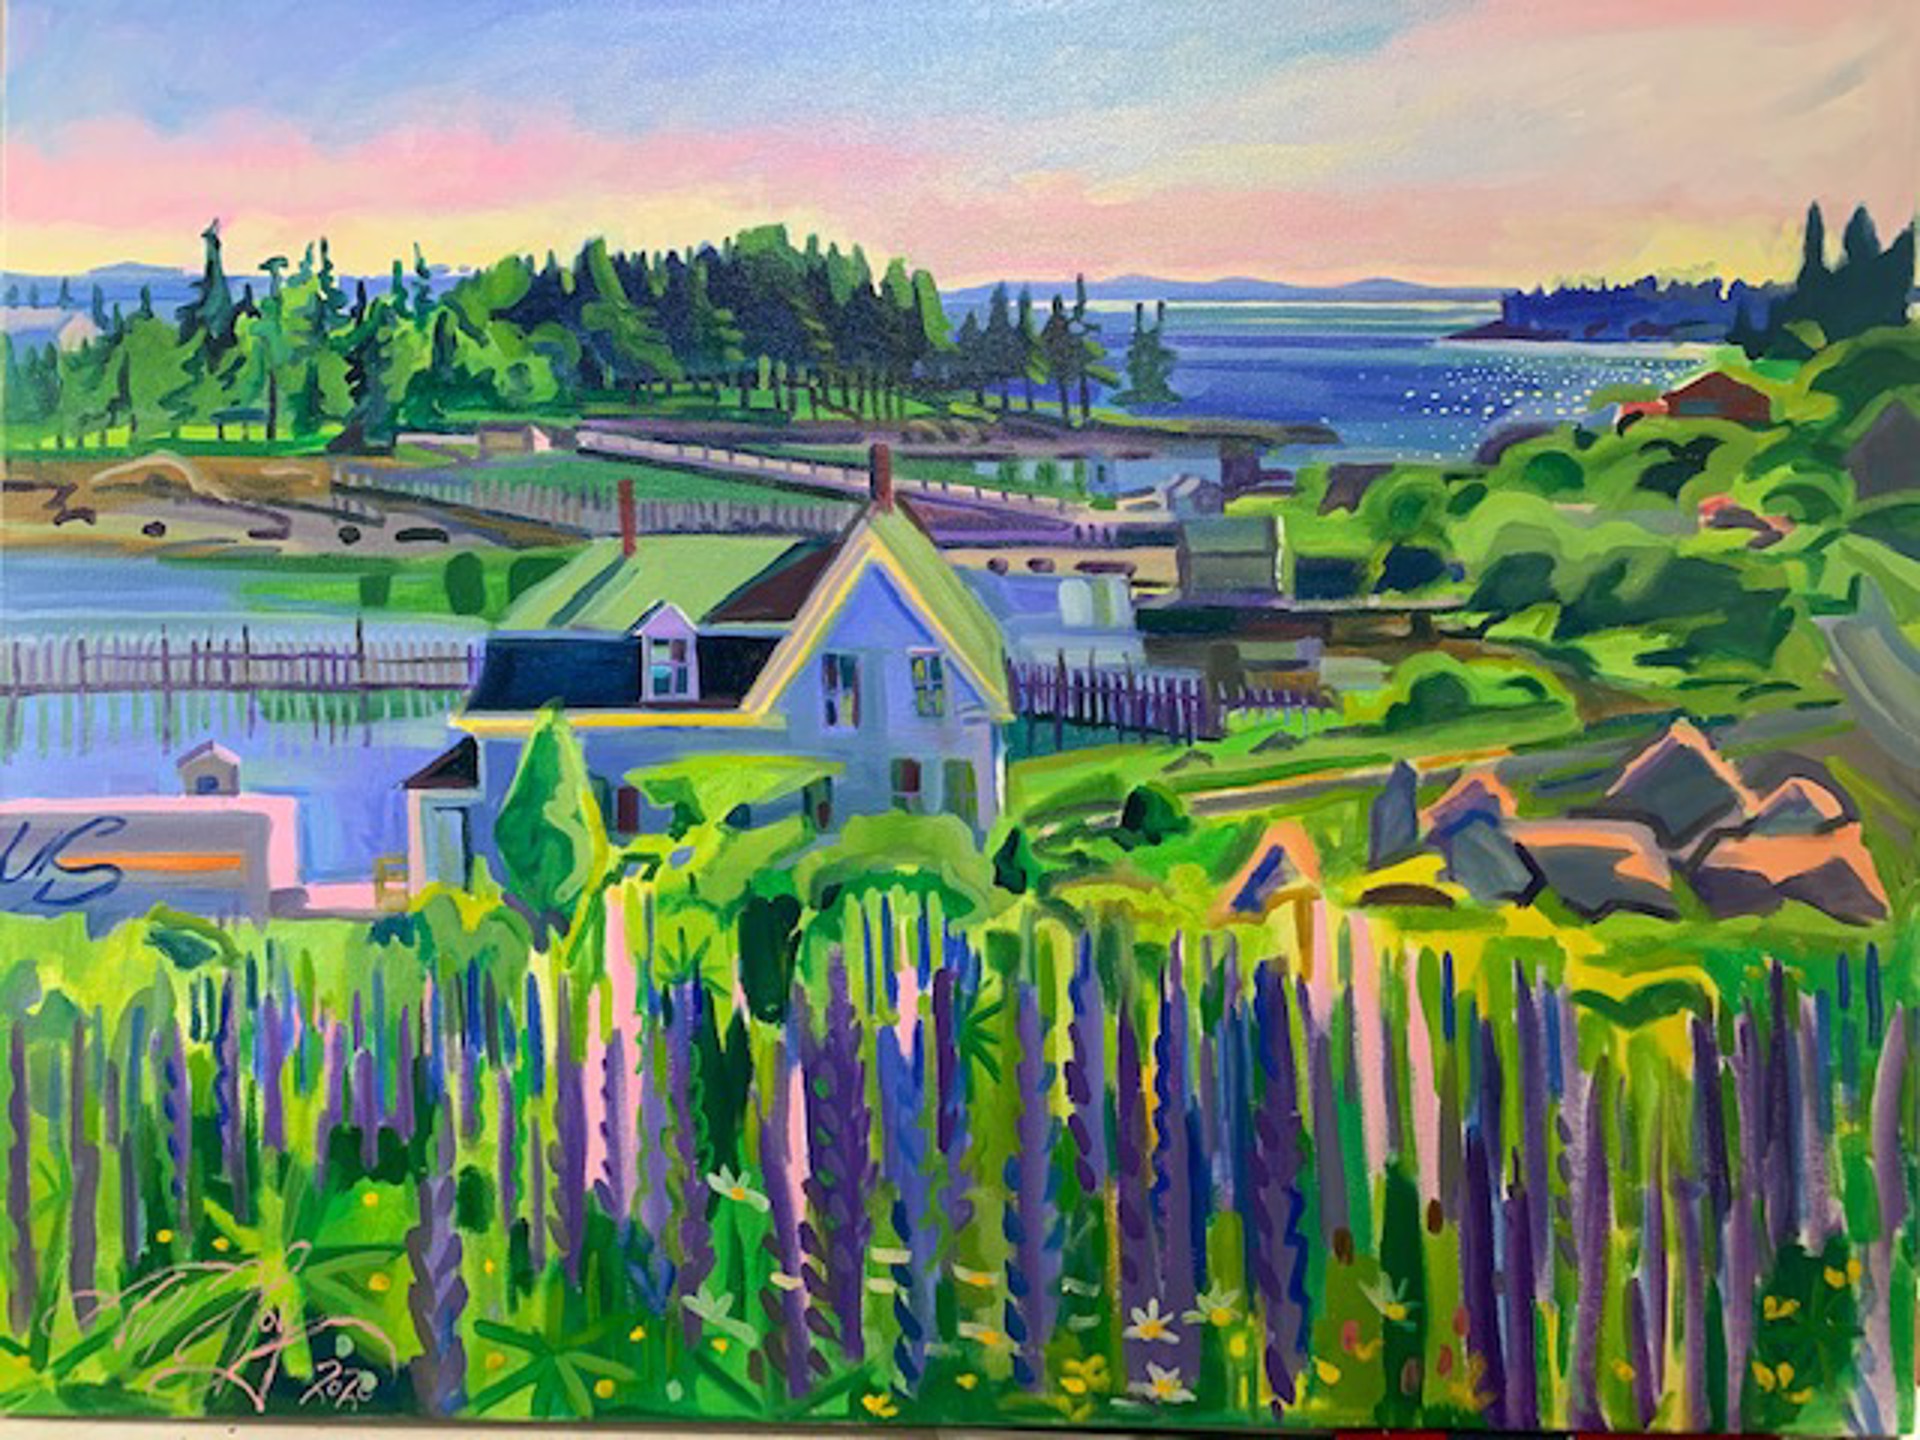 Lupine Over Moose Island by Jill Hoy